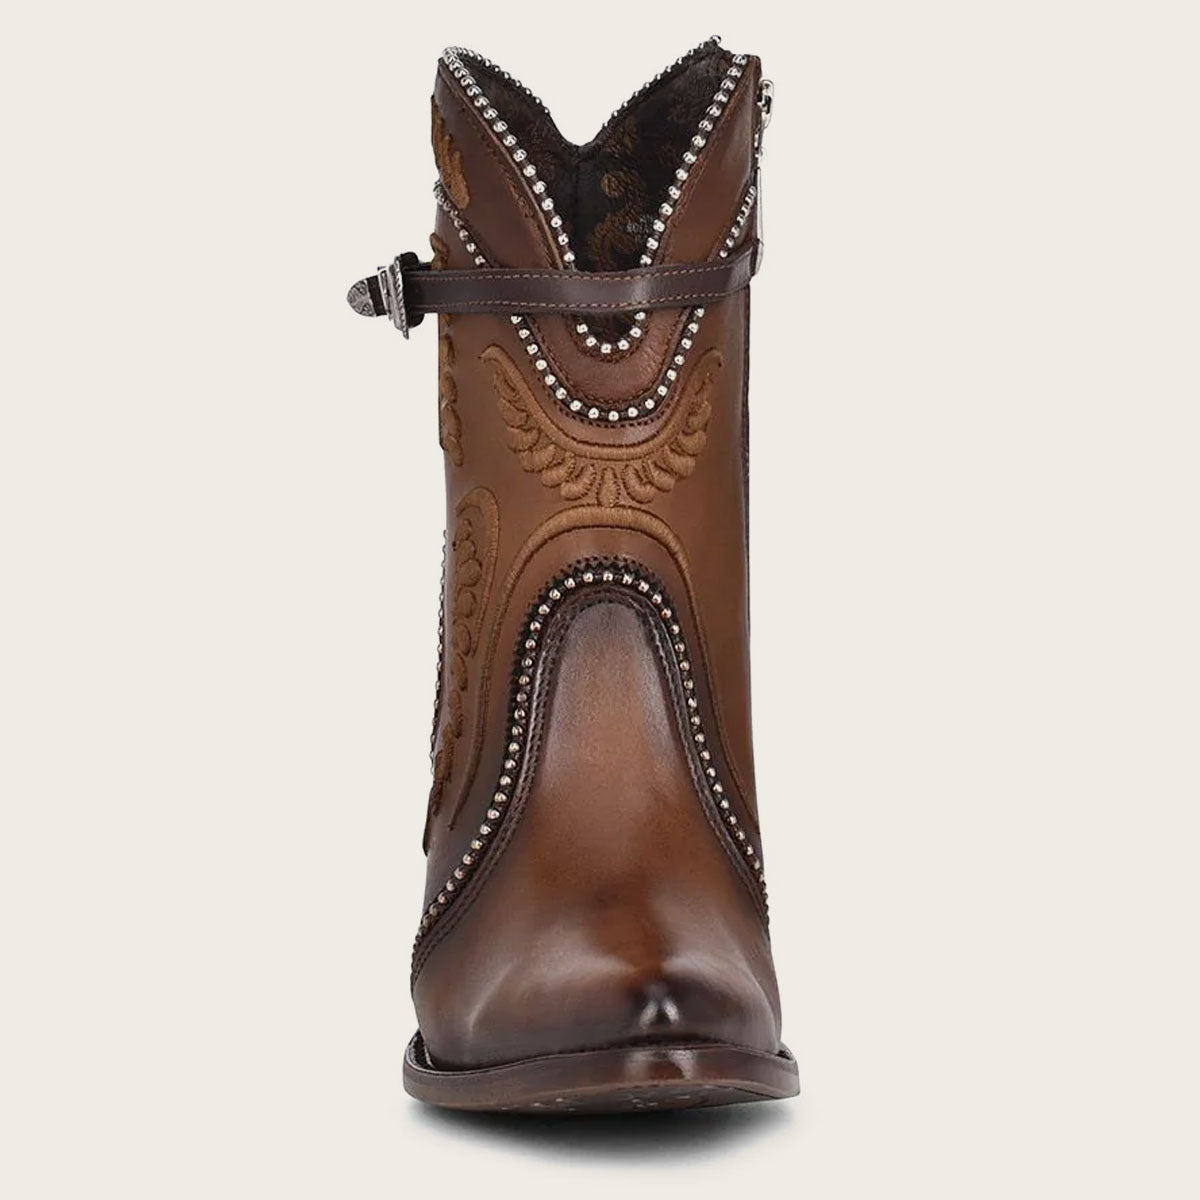 These boots combine style and practicality with a leather strap, metallic buckle, and inner zipper for easy on-and-off.